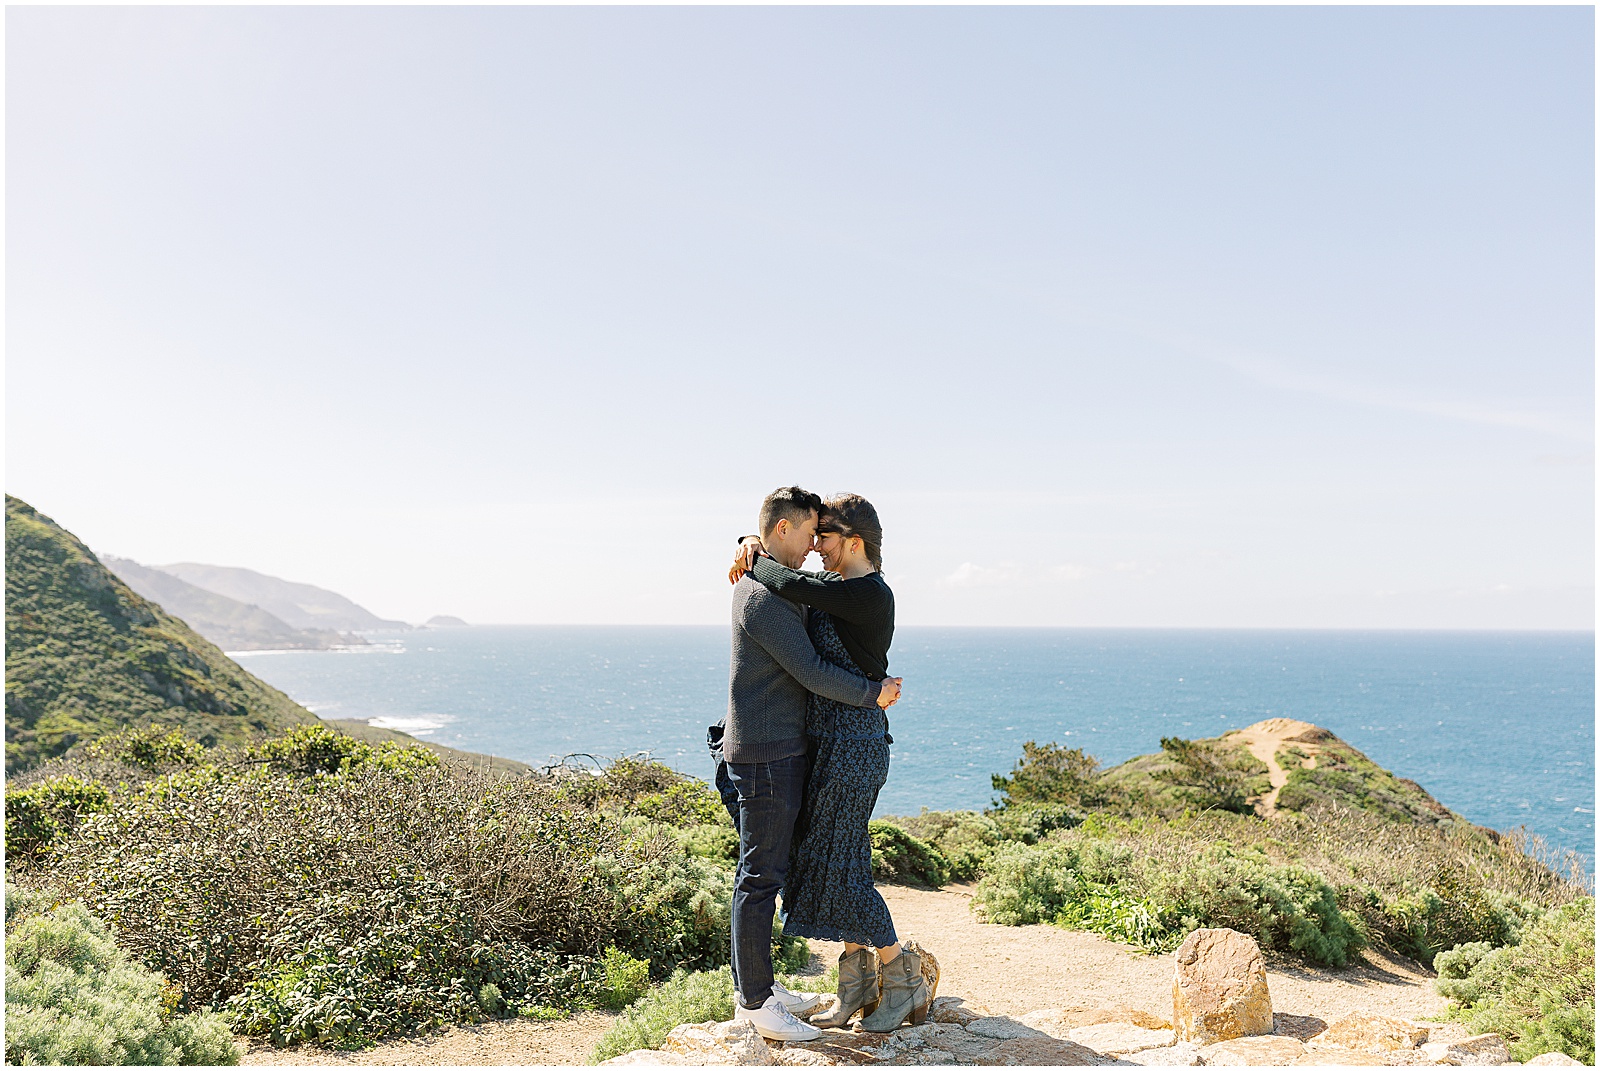 Man and woman embracing after a surprise proposal in Big Sur